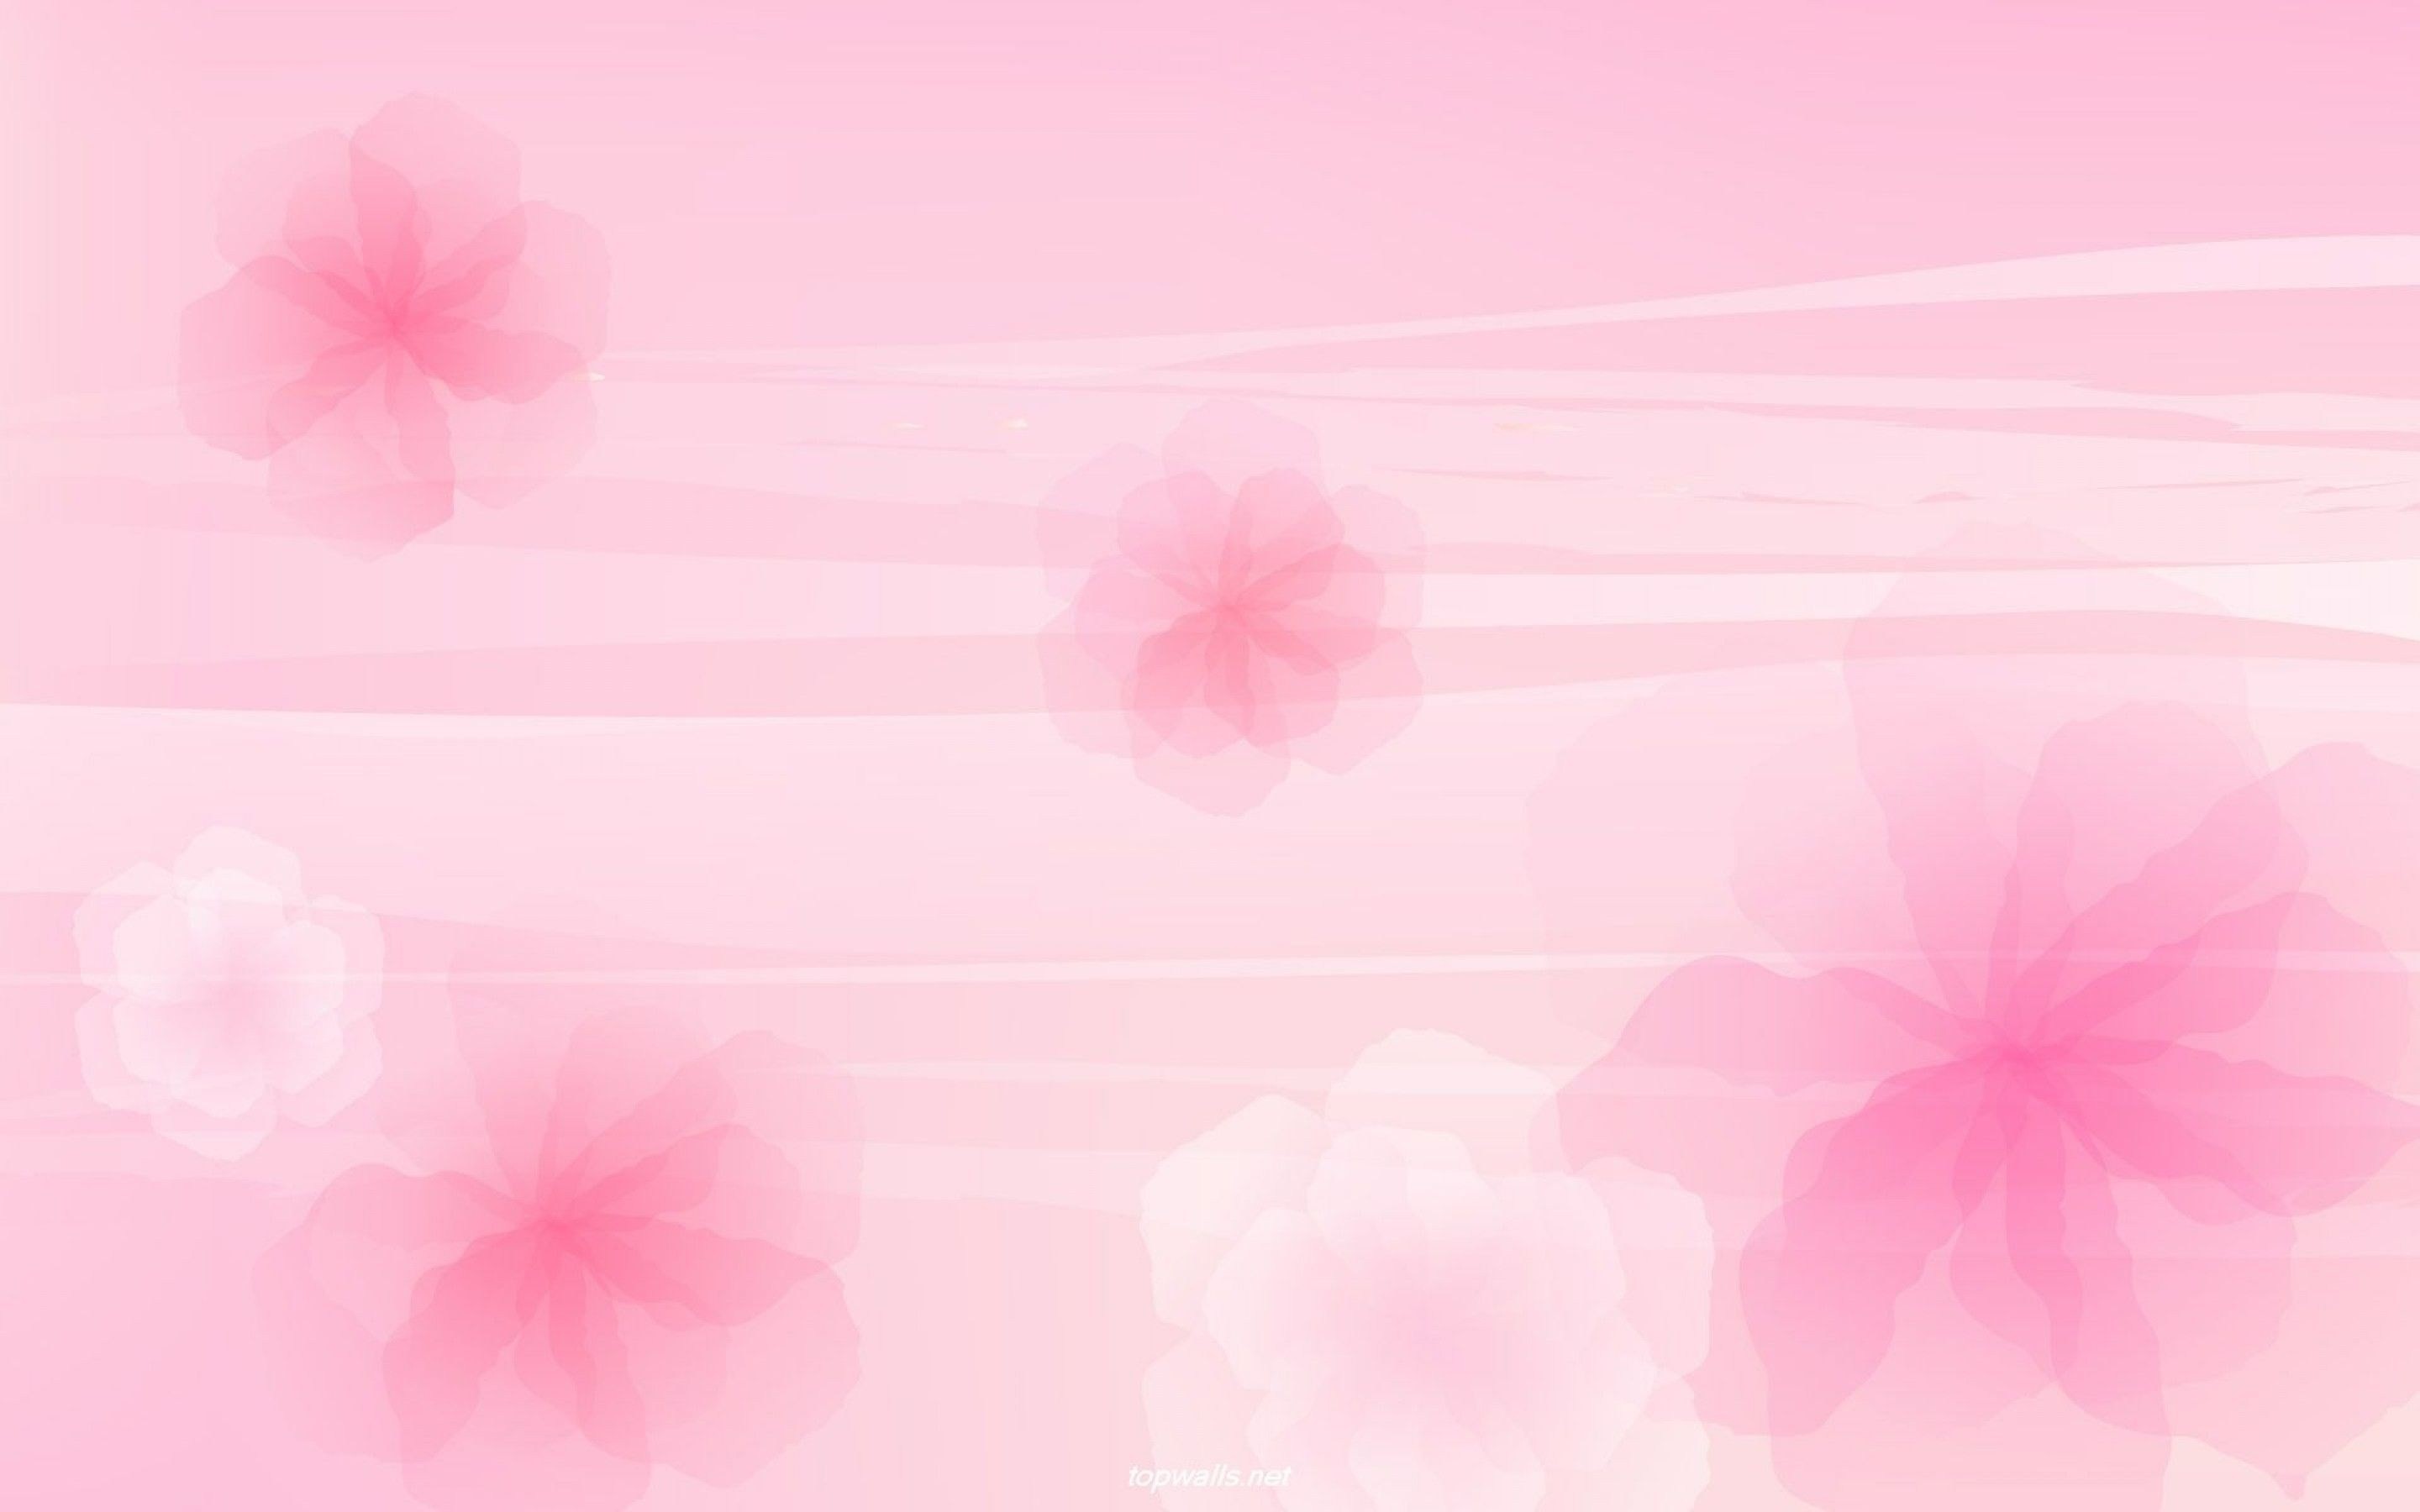 Pink Background Images  Free iPhone  Zoom HD Wallpapers  Vectors   rawpixel